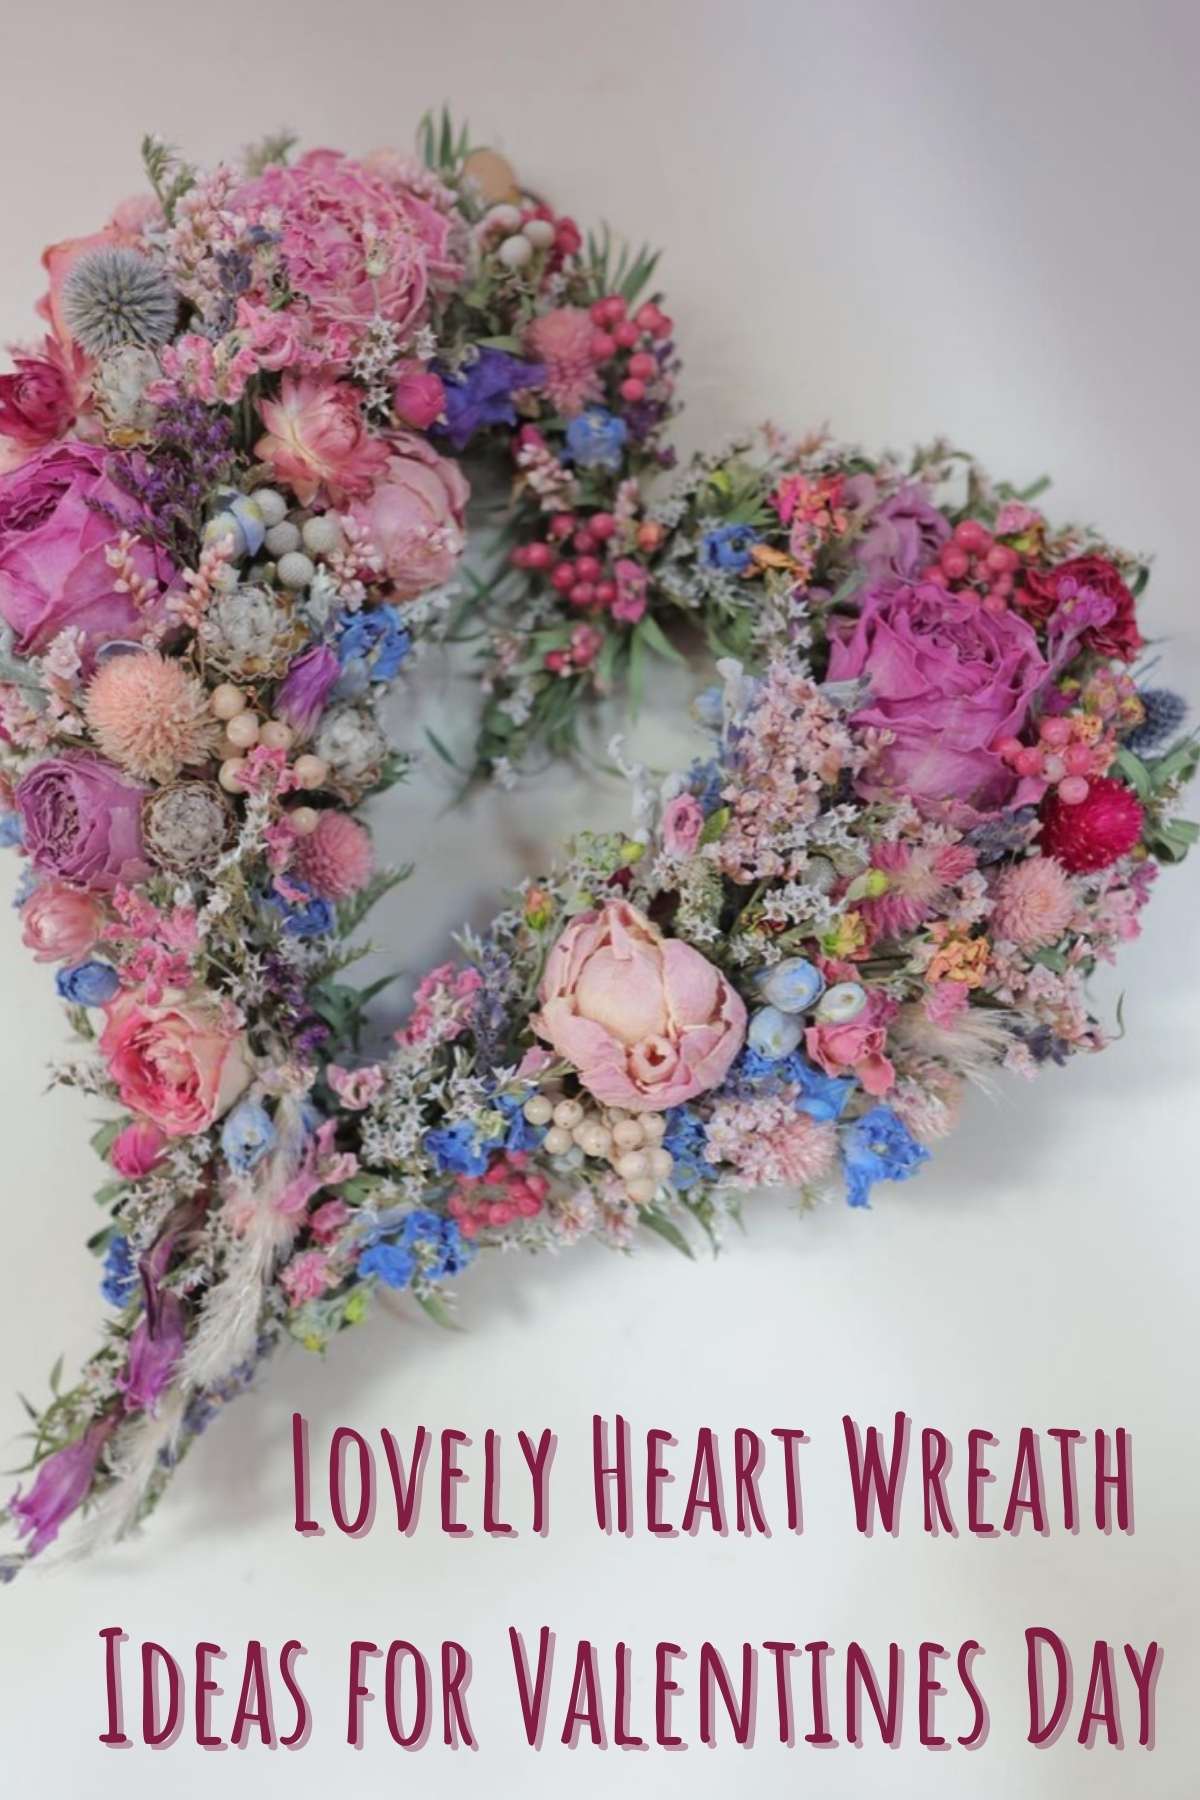 Lovely Heart Wreath ideas for Valentines Day. Colorful dried flower heart wreath.